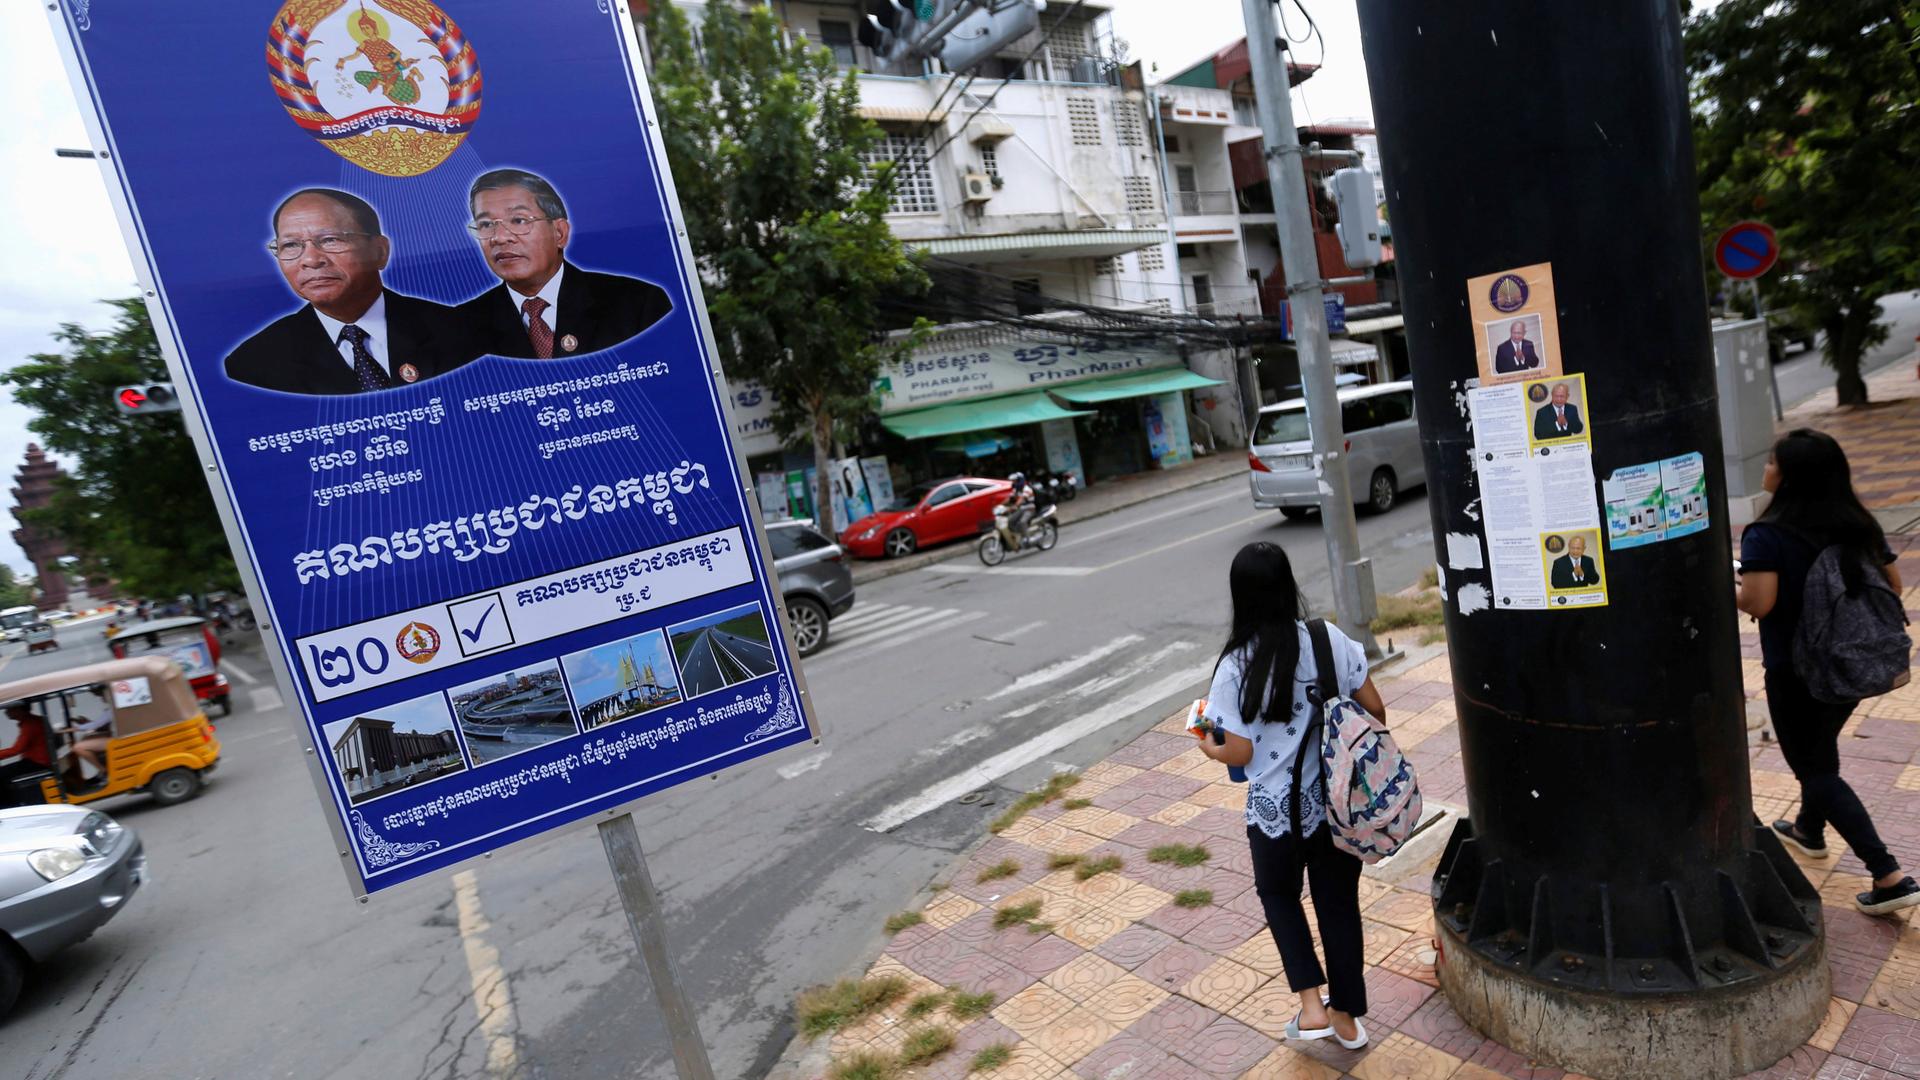 A blue sign showing two politicians stands next to an intersection in a city, where a woman is waiting to cross the street. The signs are written in Cambodian. 